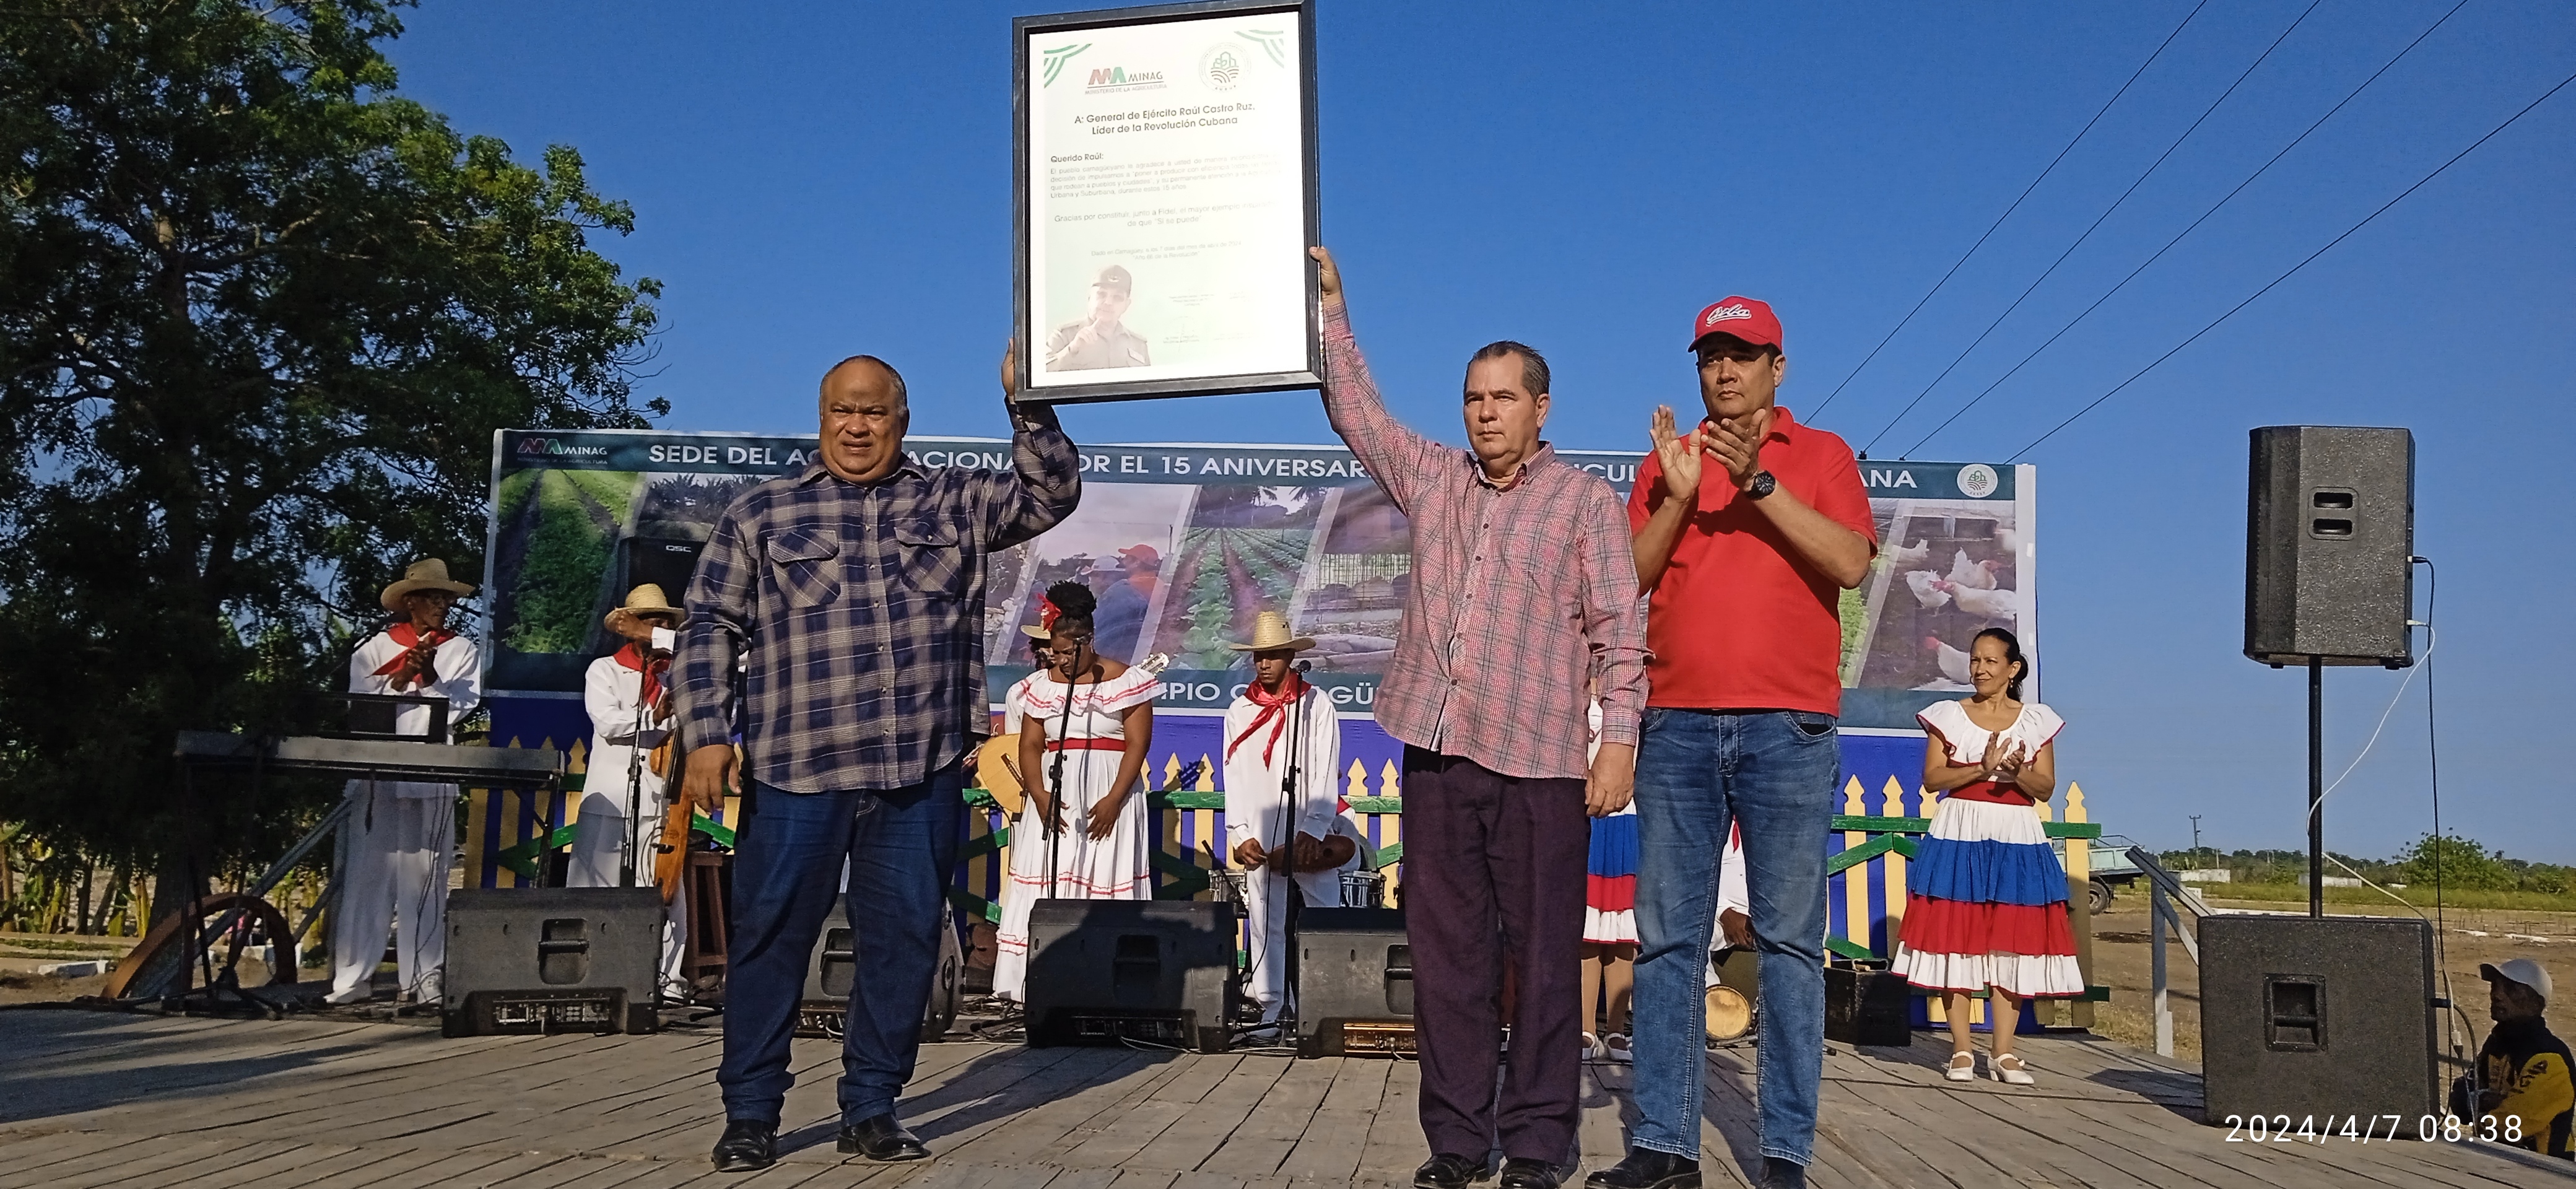 In Camagüey, Raúl Castro acknowledges at an event for the anniversary of Suburban Agriculture (+ Photo)